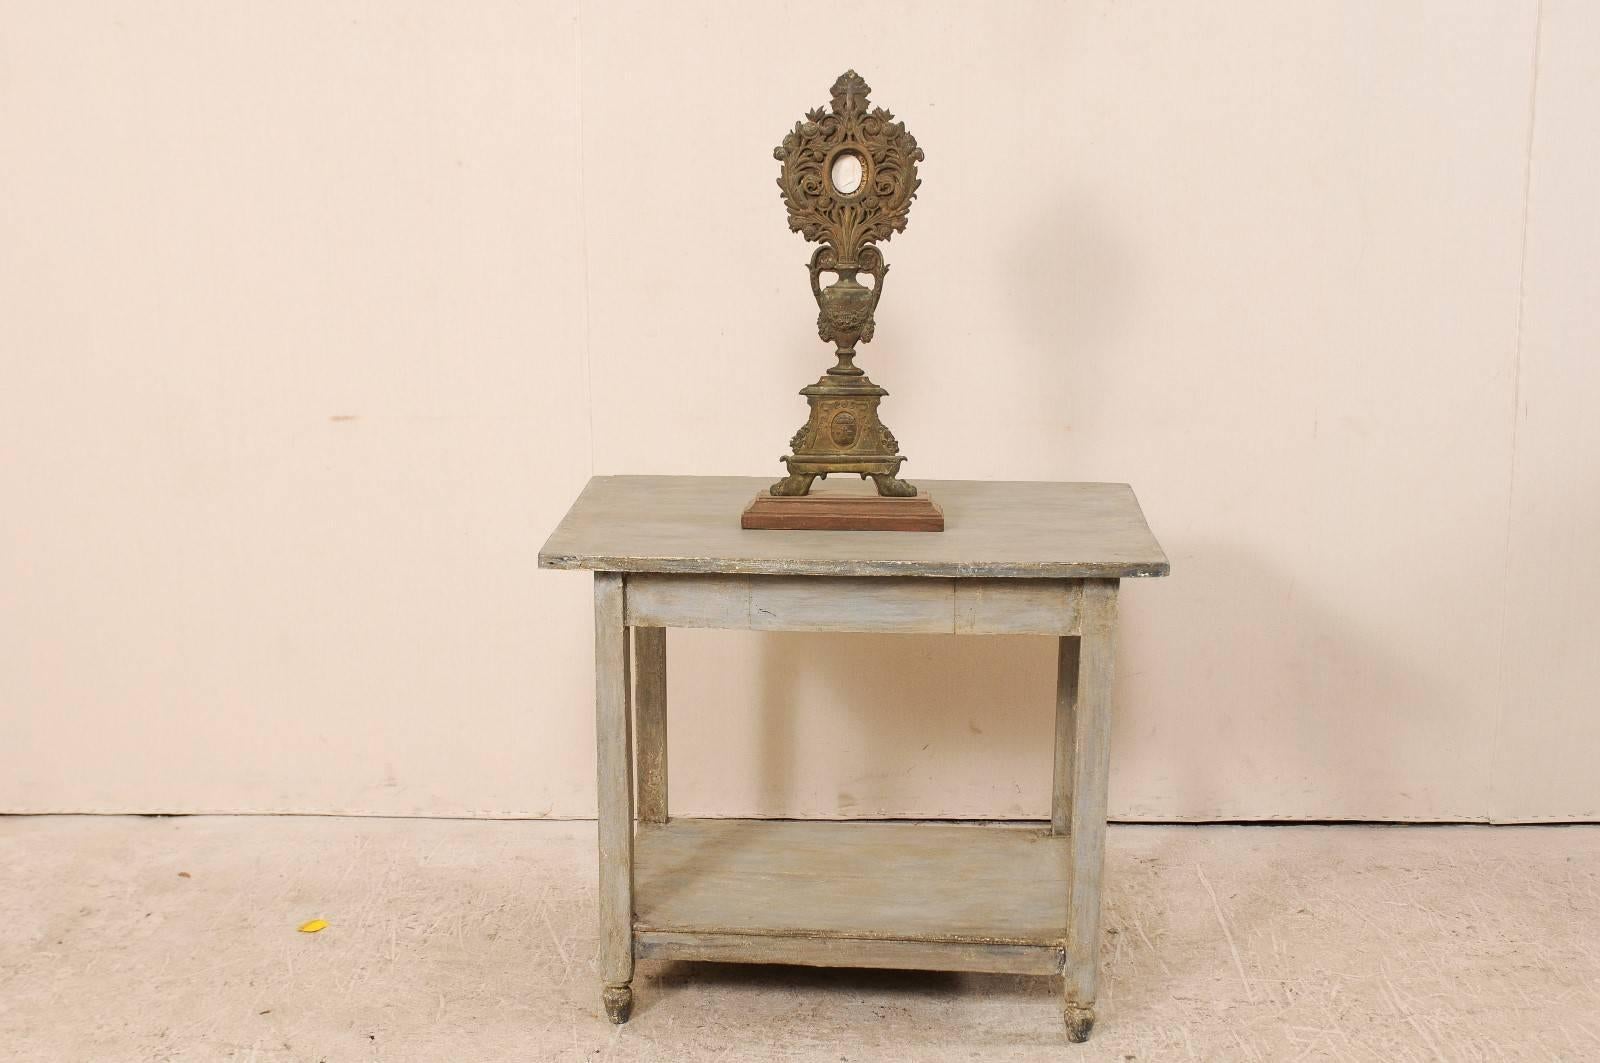 French 19th Century Altarpiece with Central Intaglio and Decorated Repoussé In Good Condition For Sale In Atlanta, GA